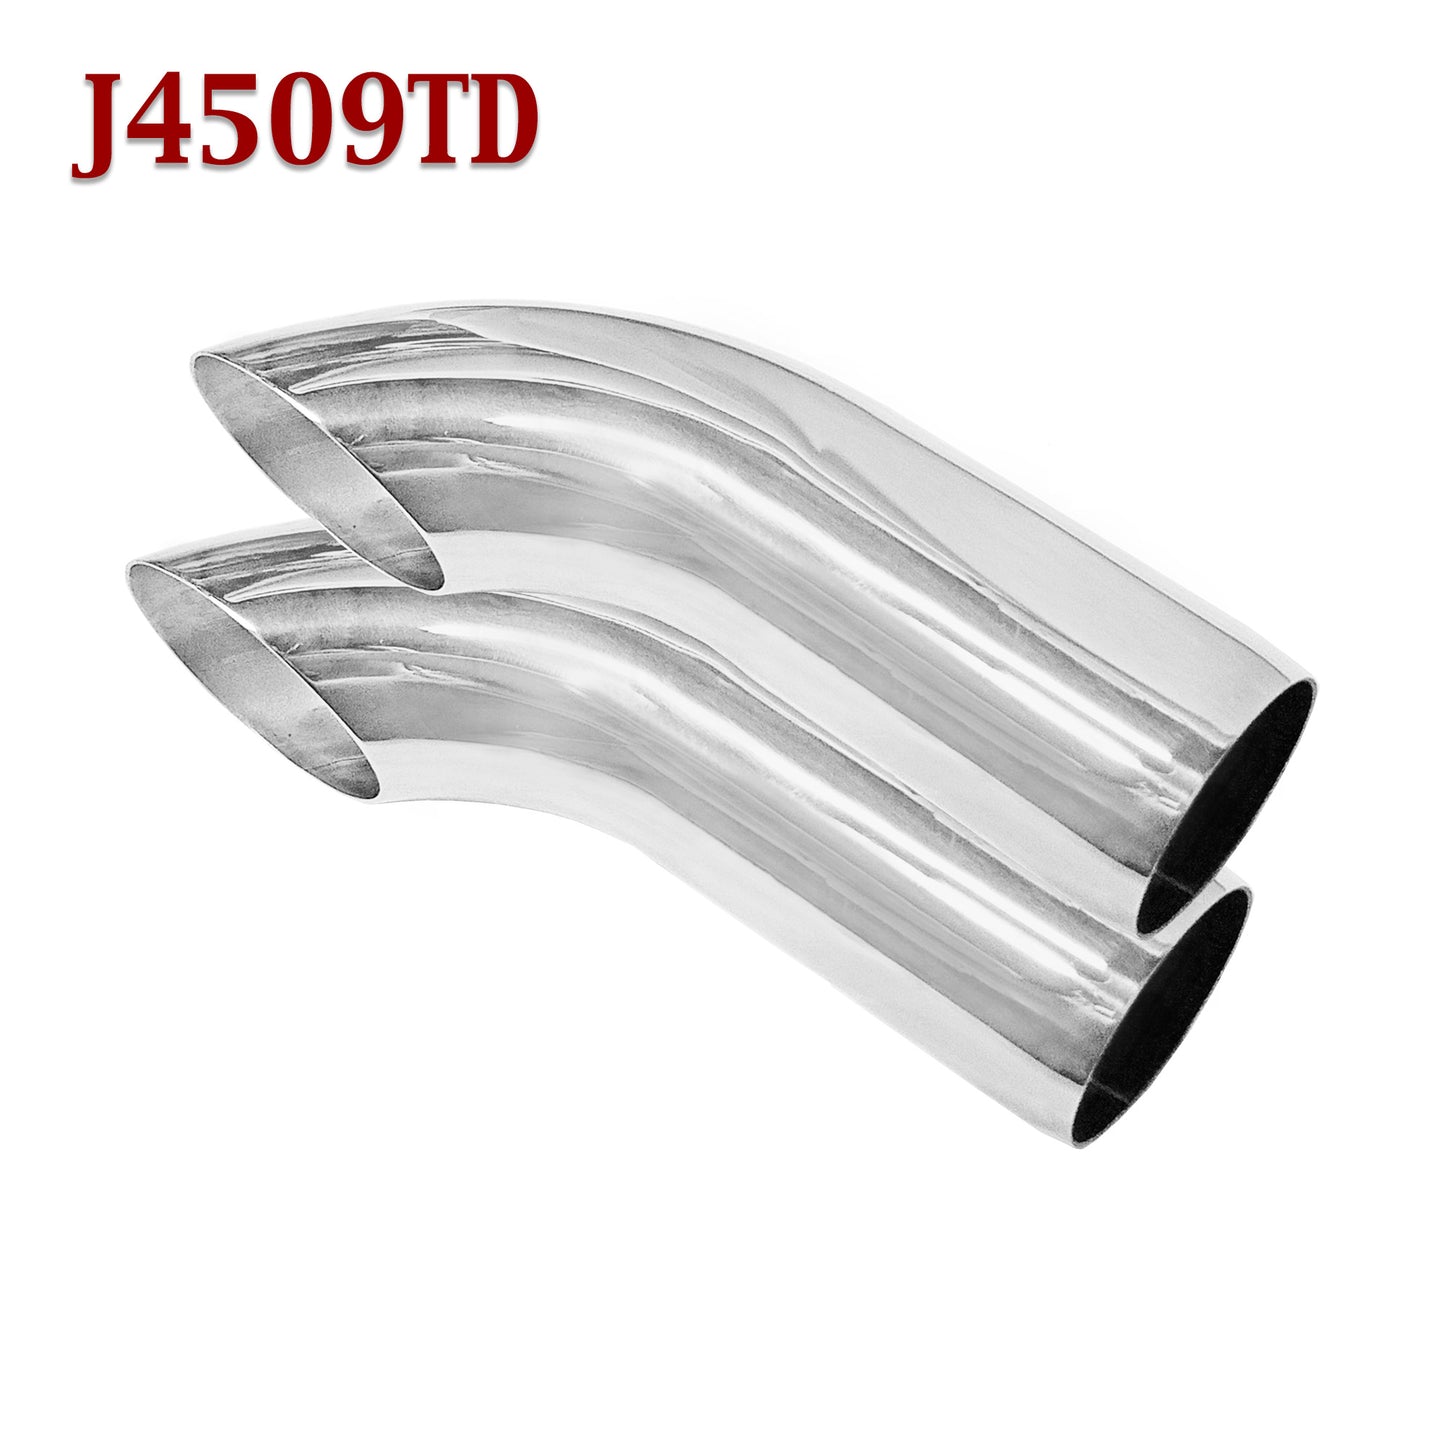 J4509TD 2.25" Stainless Turn Down Exhaust Tip 2 1/4" Inlet 2 1/2" Outlet 9" Long